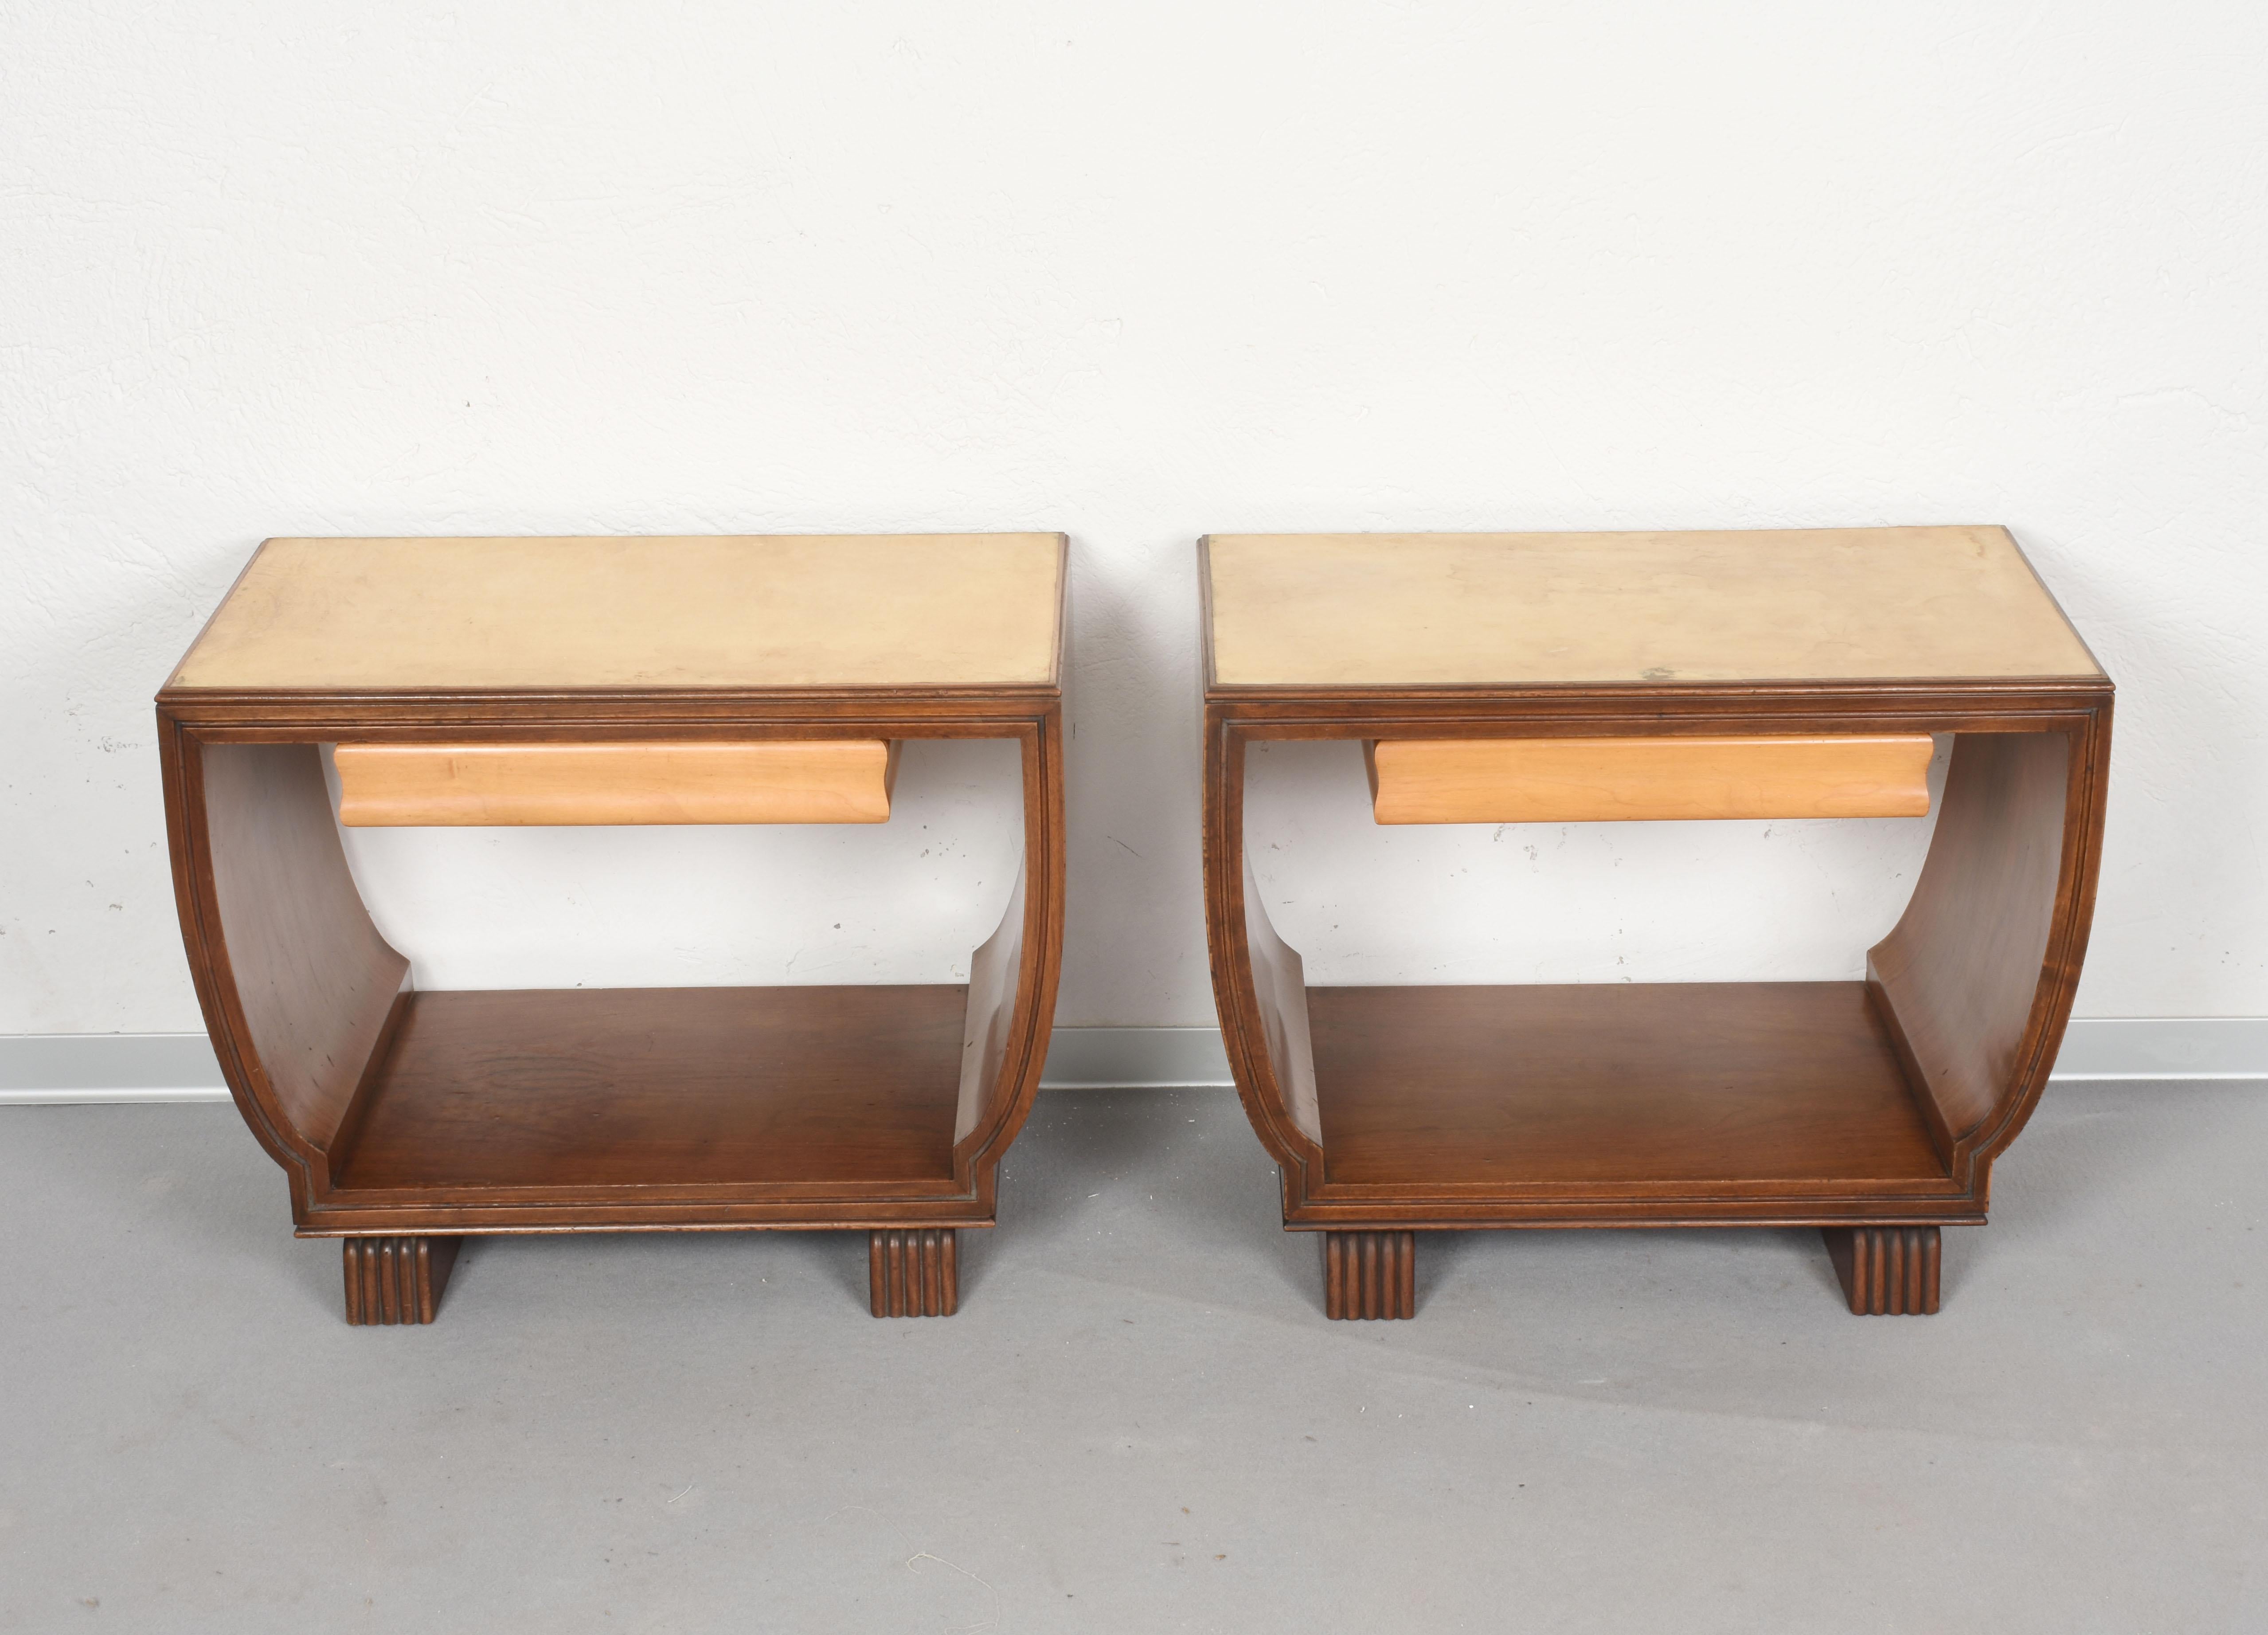 Pair of Night Stands Parchment Wood Valzania. Italian Bed Side Italy, 1930s I 1